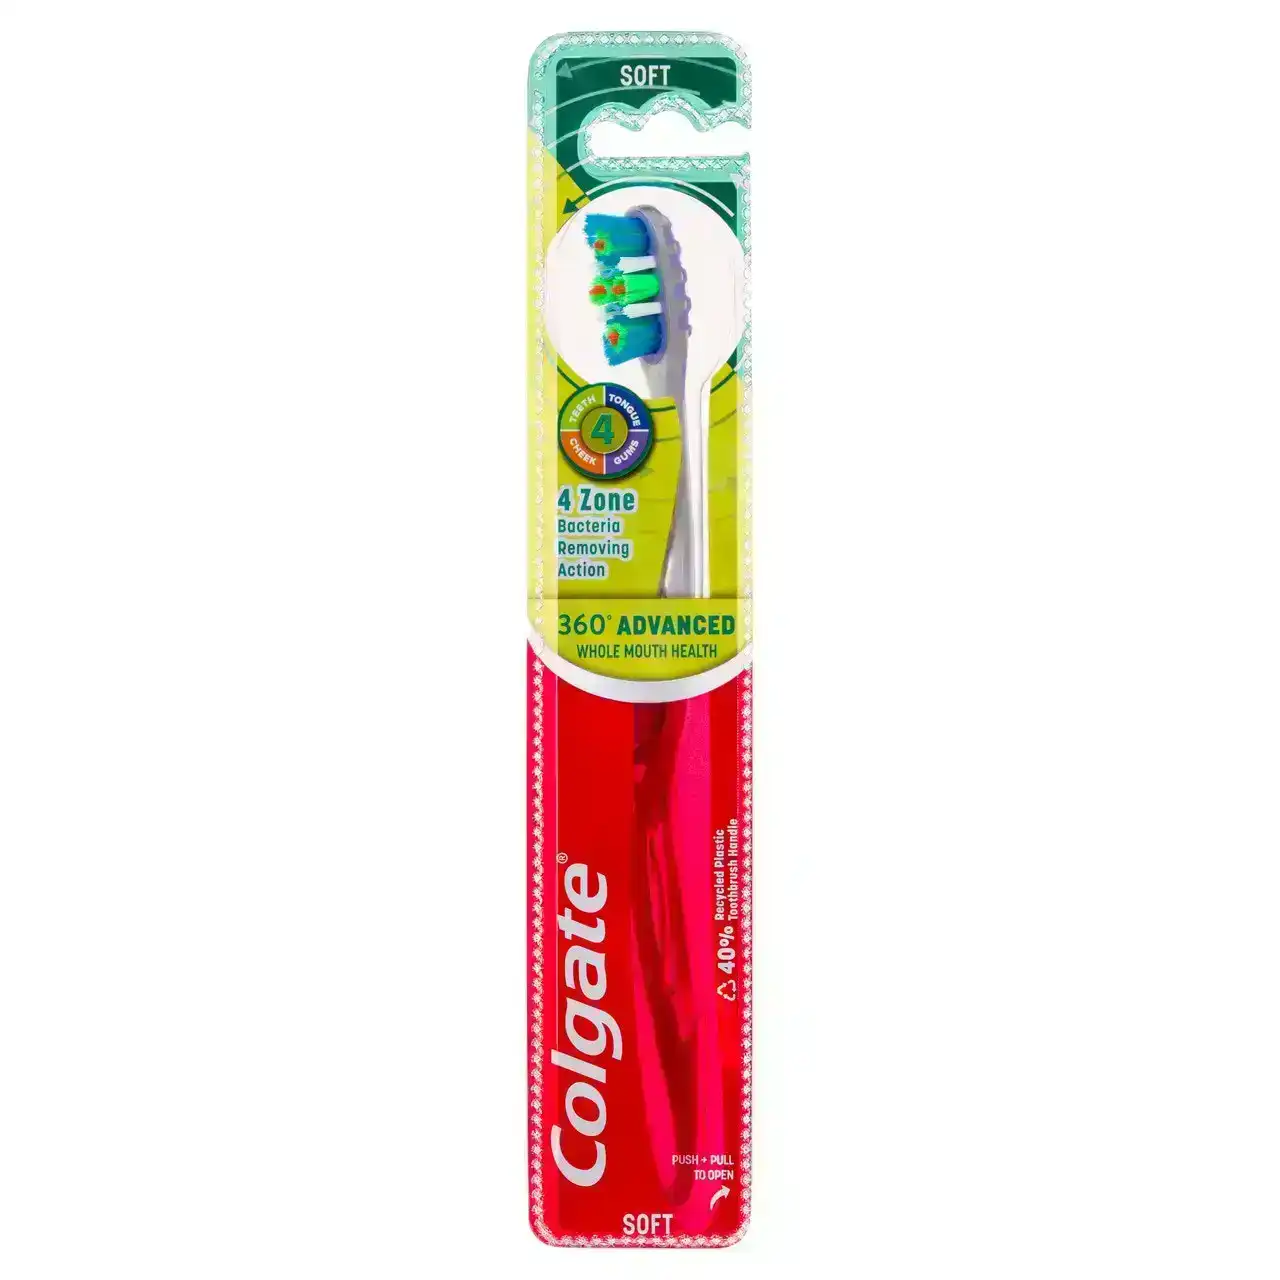 Colgate 360o Advanced Whole Mouth Health Manual Toothbrush, 1 Pack, Soft Bristles with 4 Zone Bacteria Removing Action